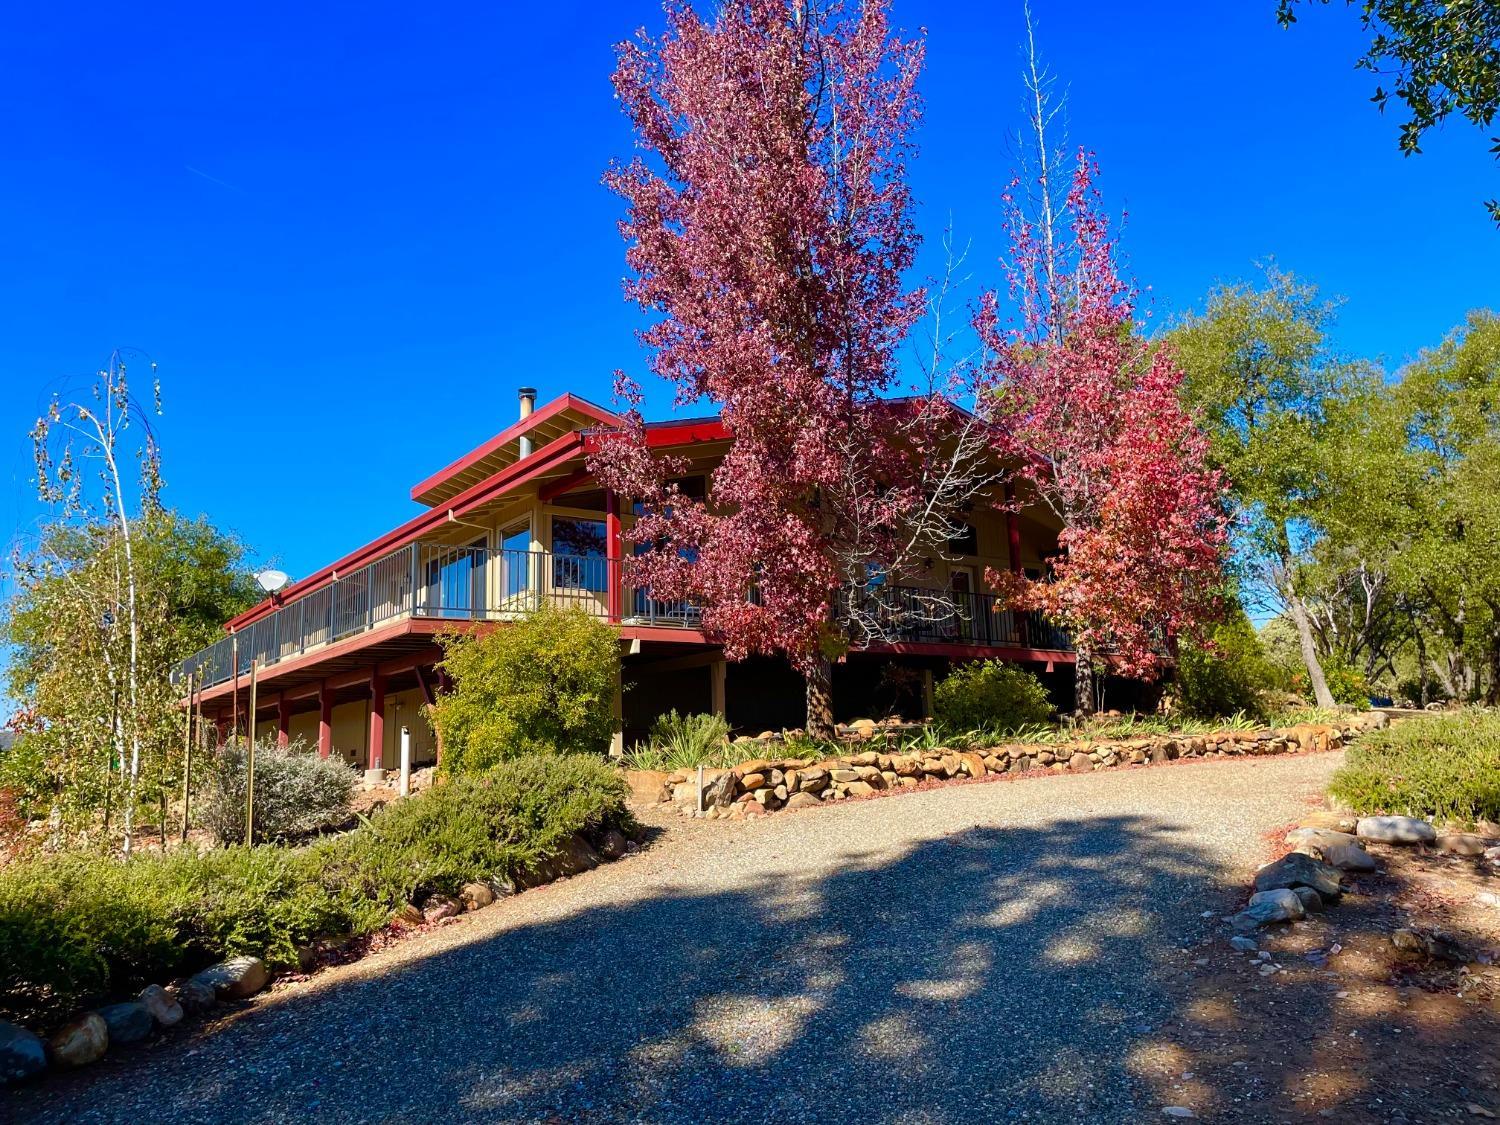 Photo of 9870 Sheep Ranch Rd in Mountain Ranch, CA